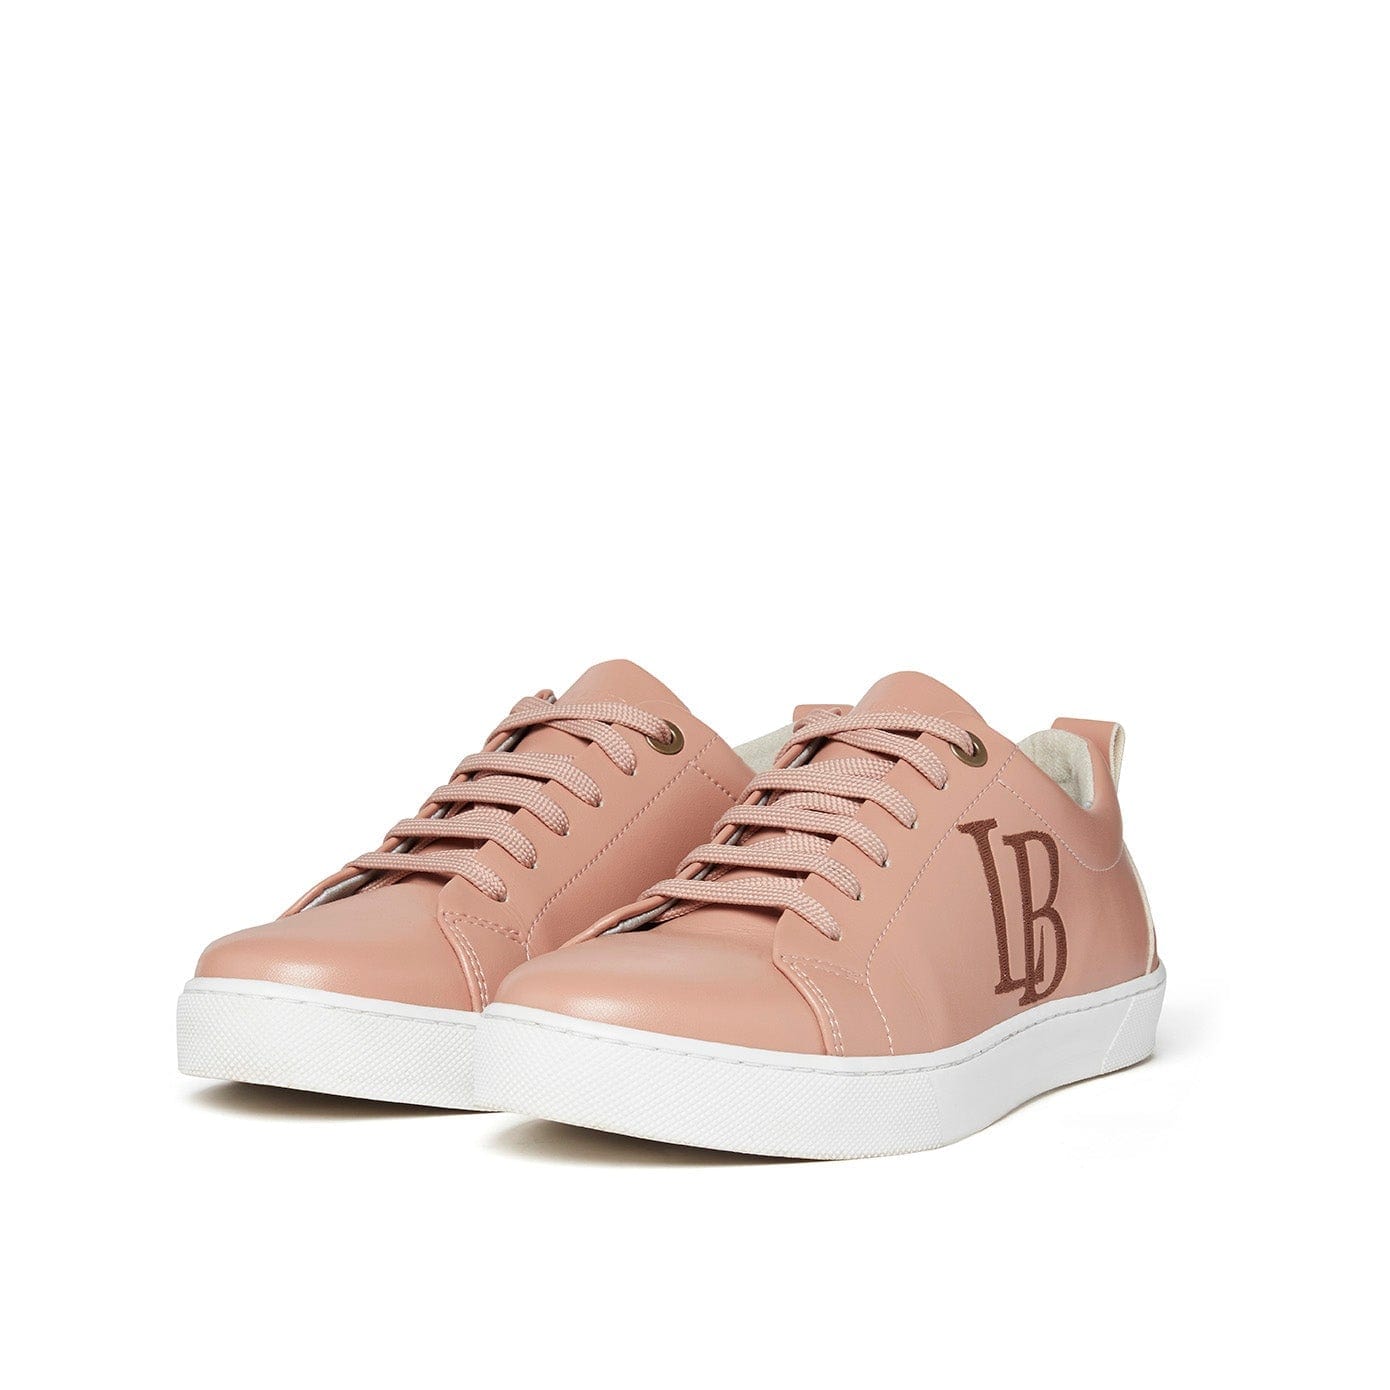 LaBante London LB Apple Leather Sneakers in Nude for Women (Pre Order)